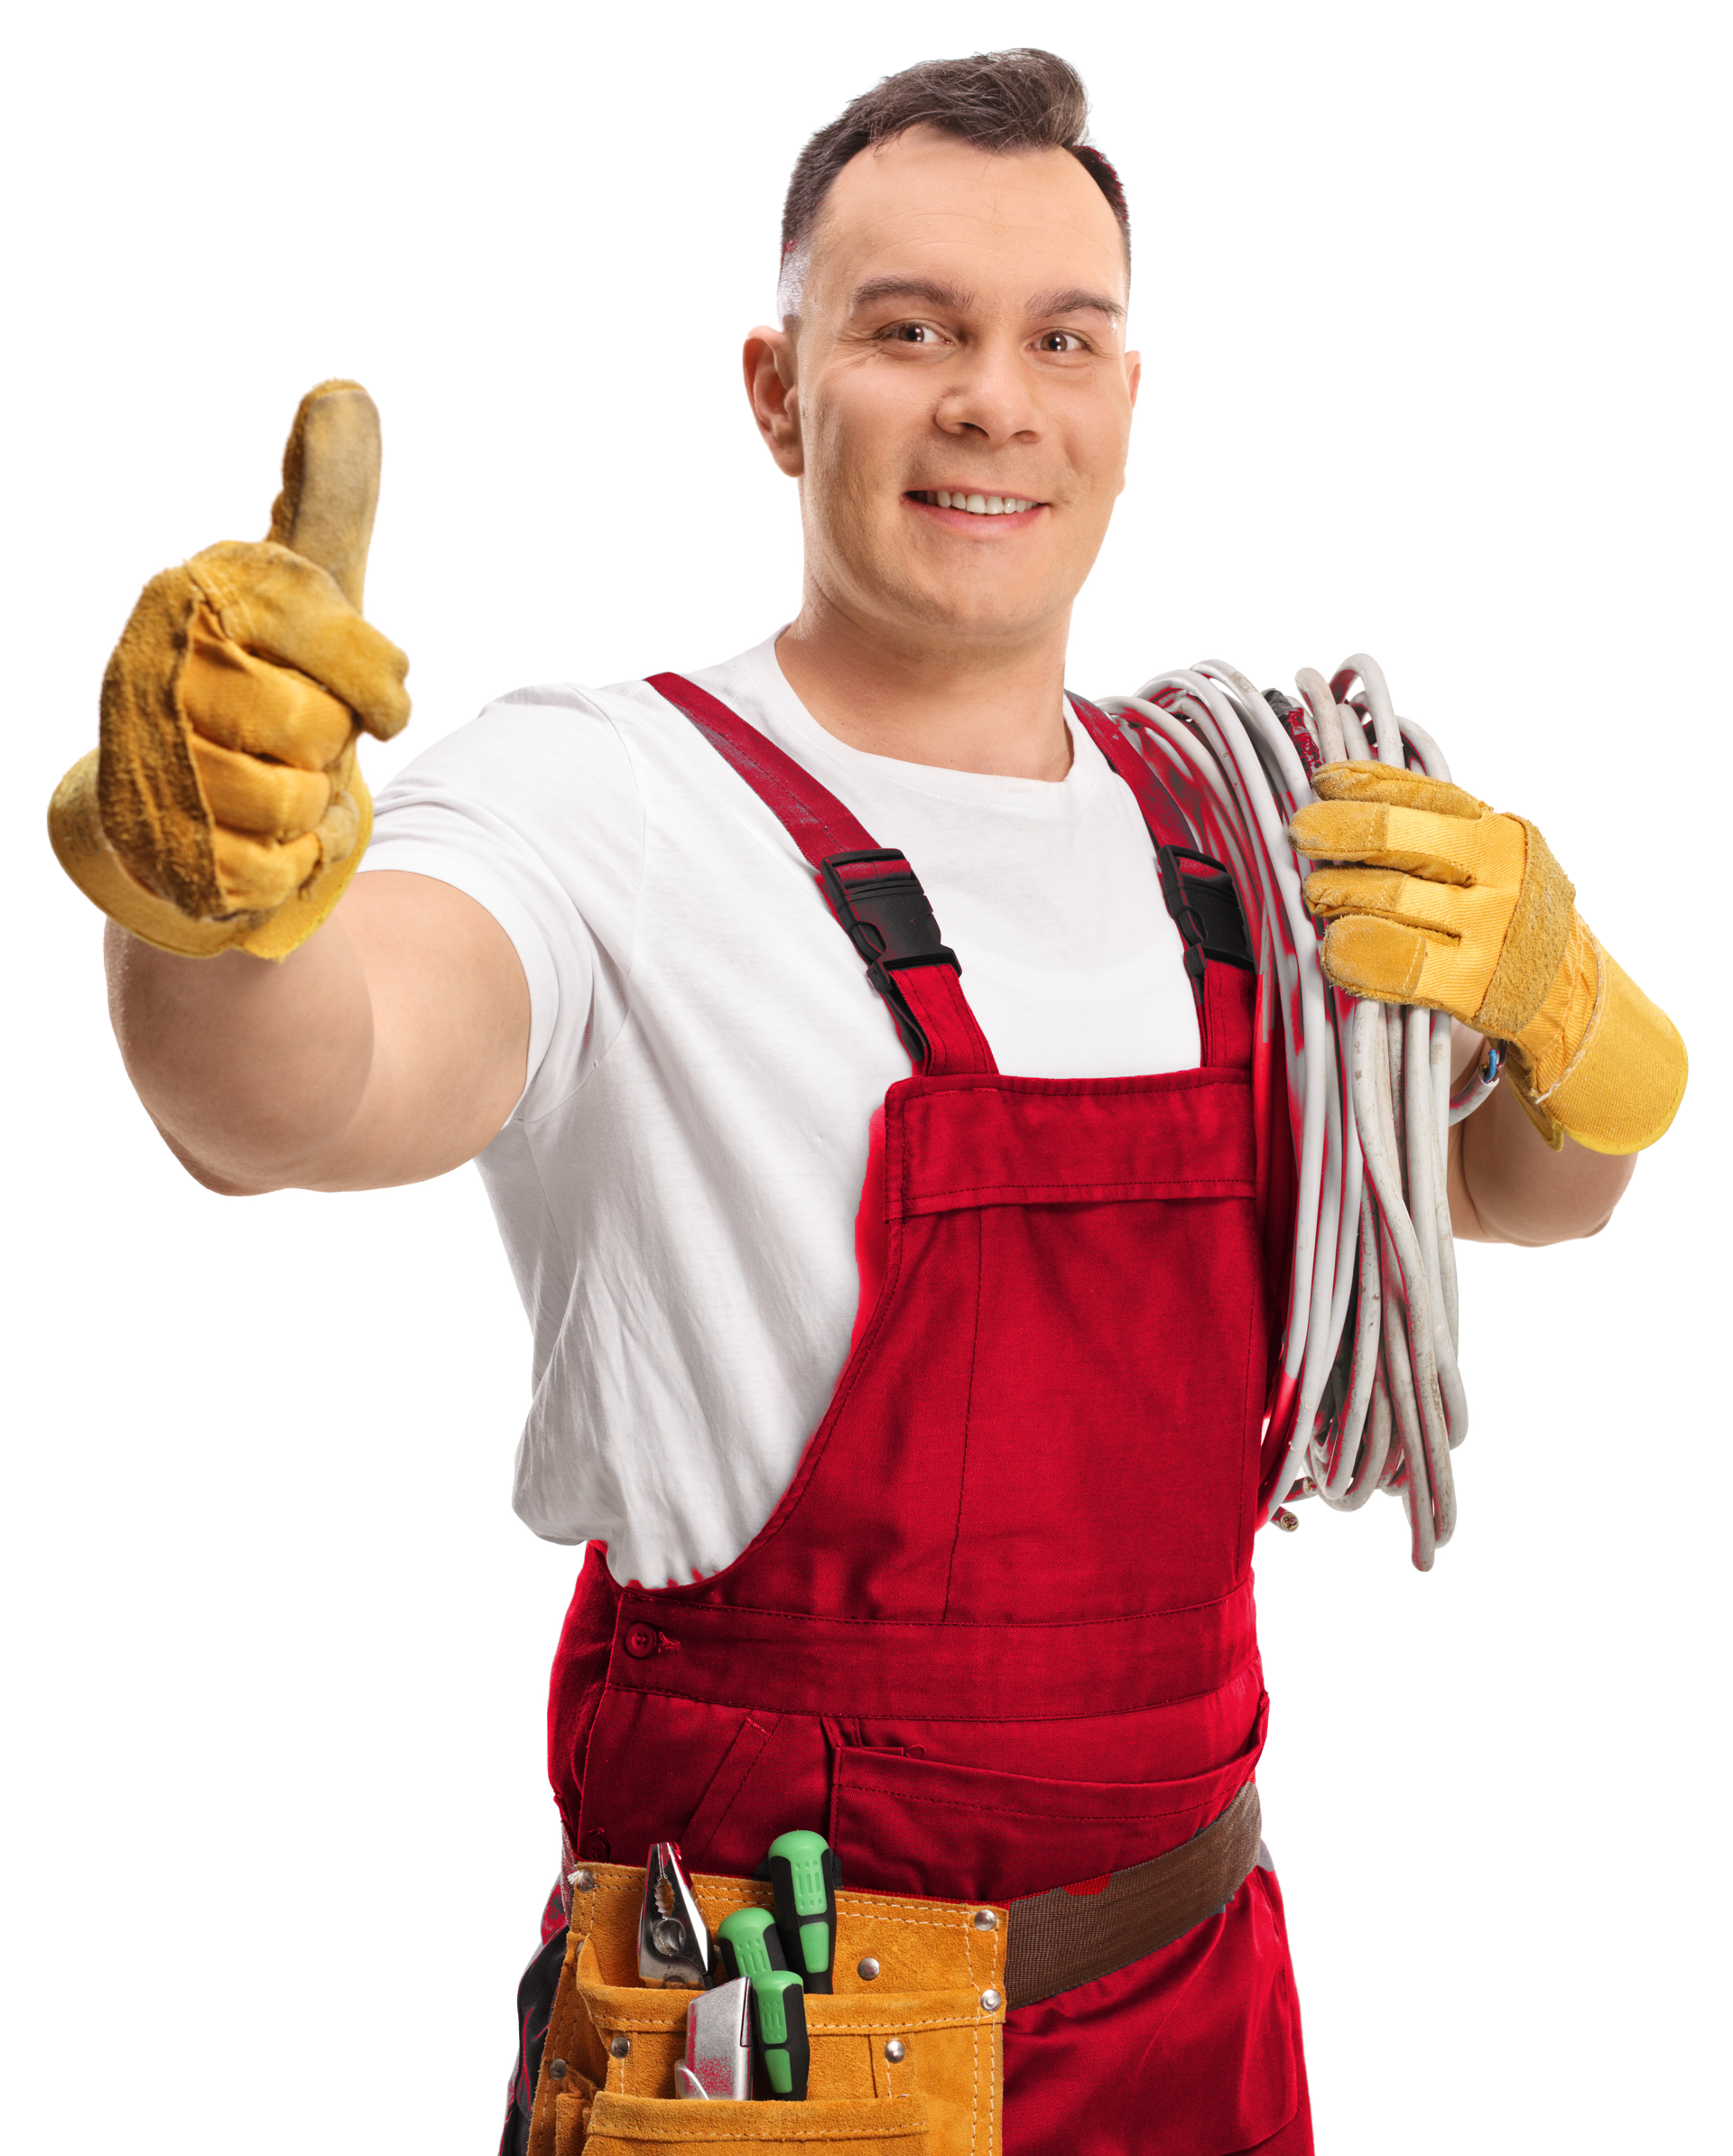 A man in red overalls is holding a rope and giving a thumbs up.